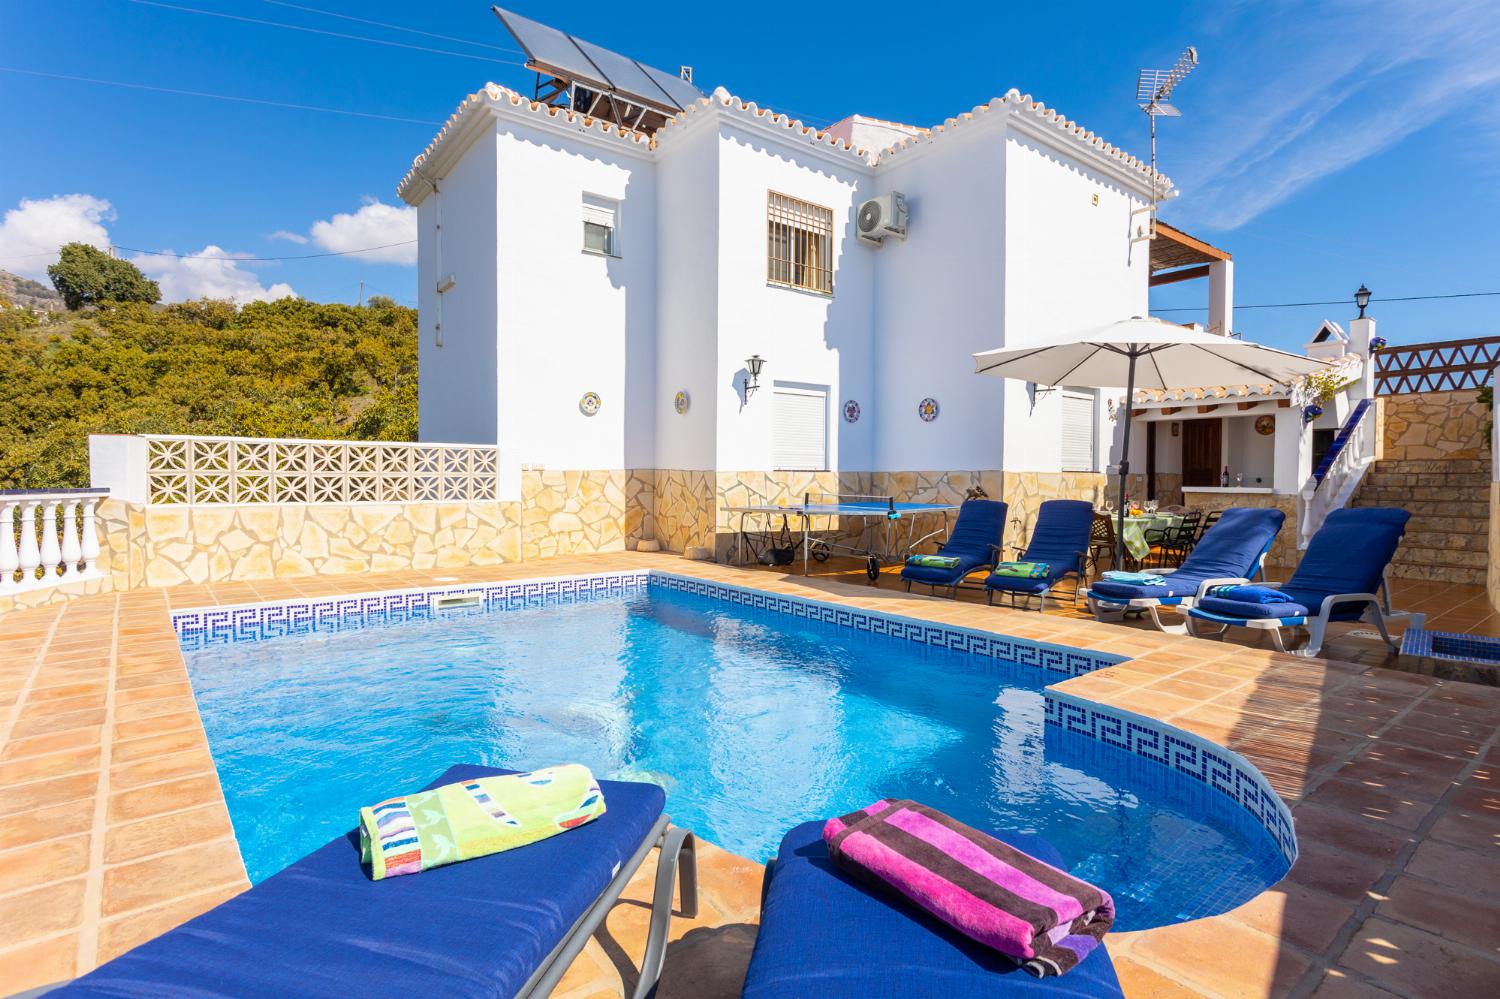 Beautiful villa with private pool and terrace with panoramic countryside views